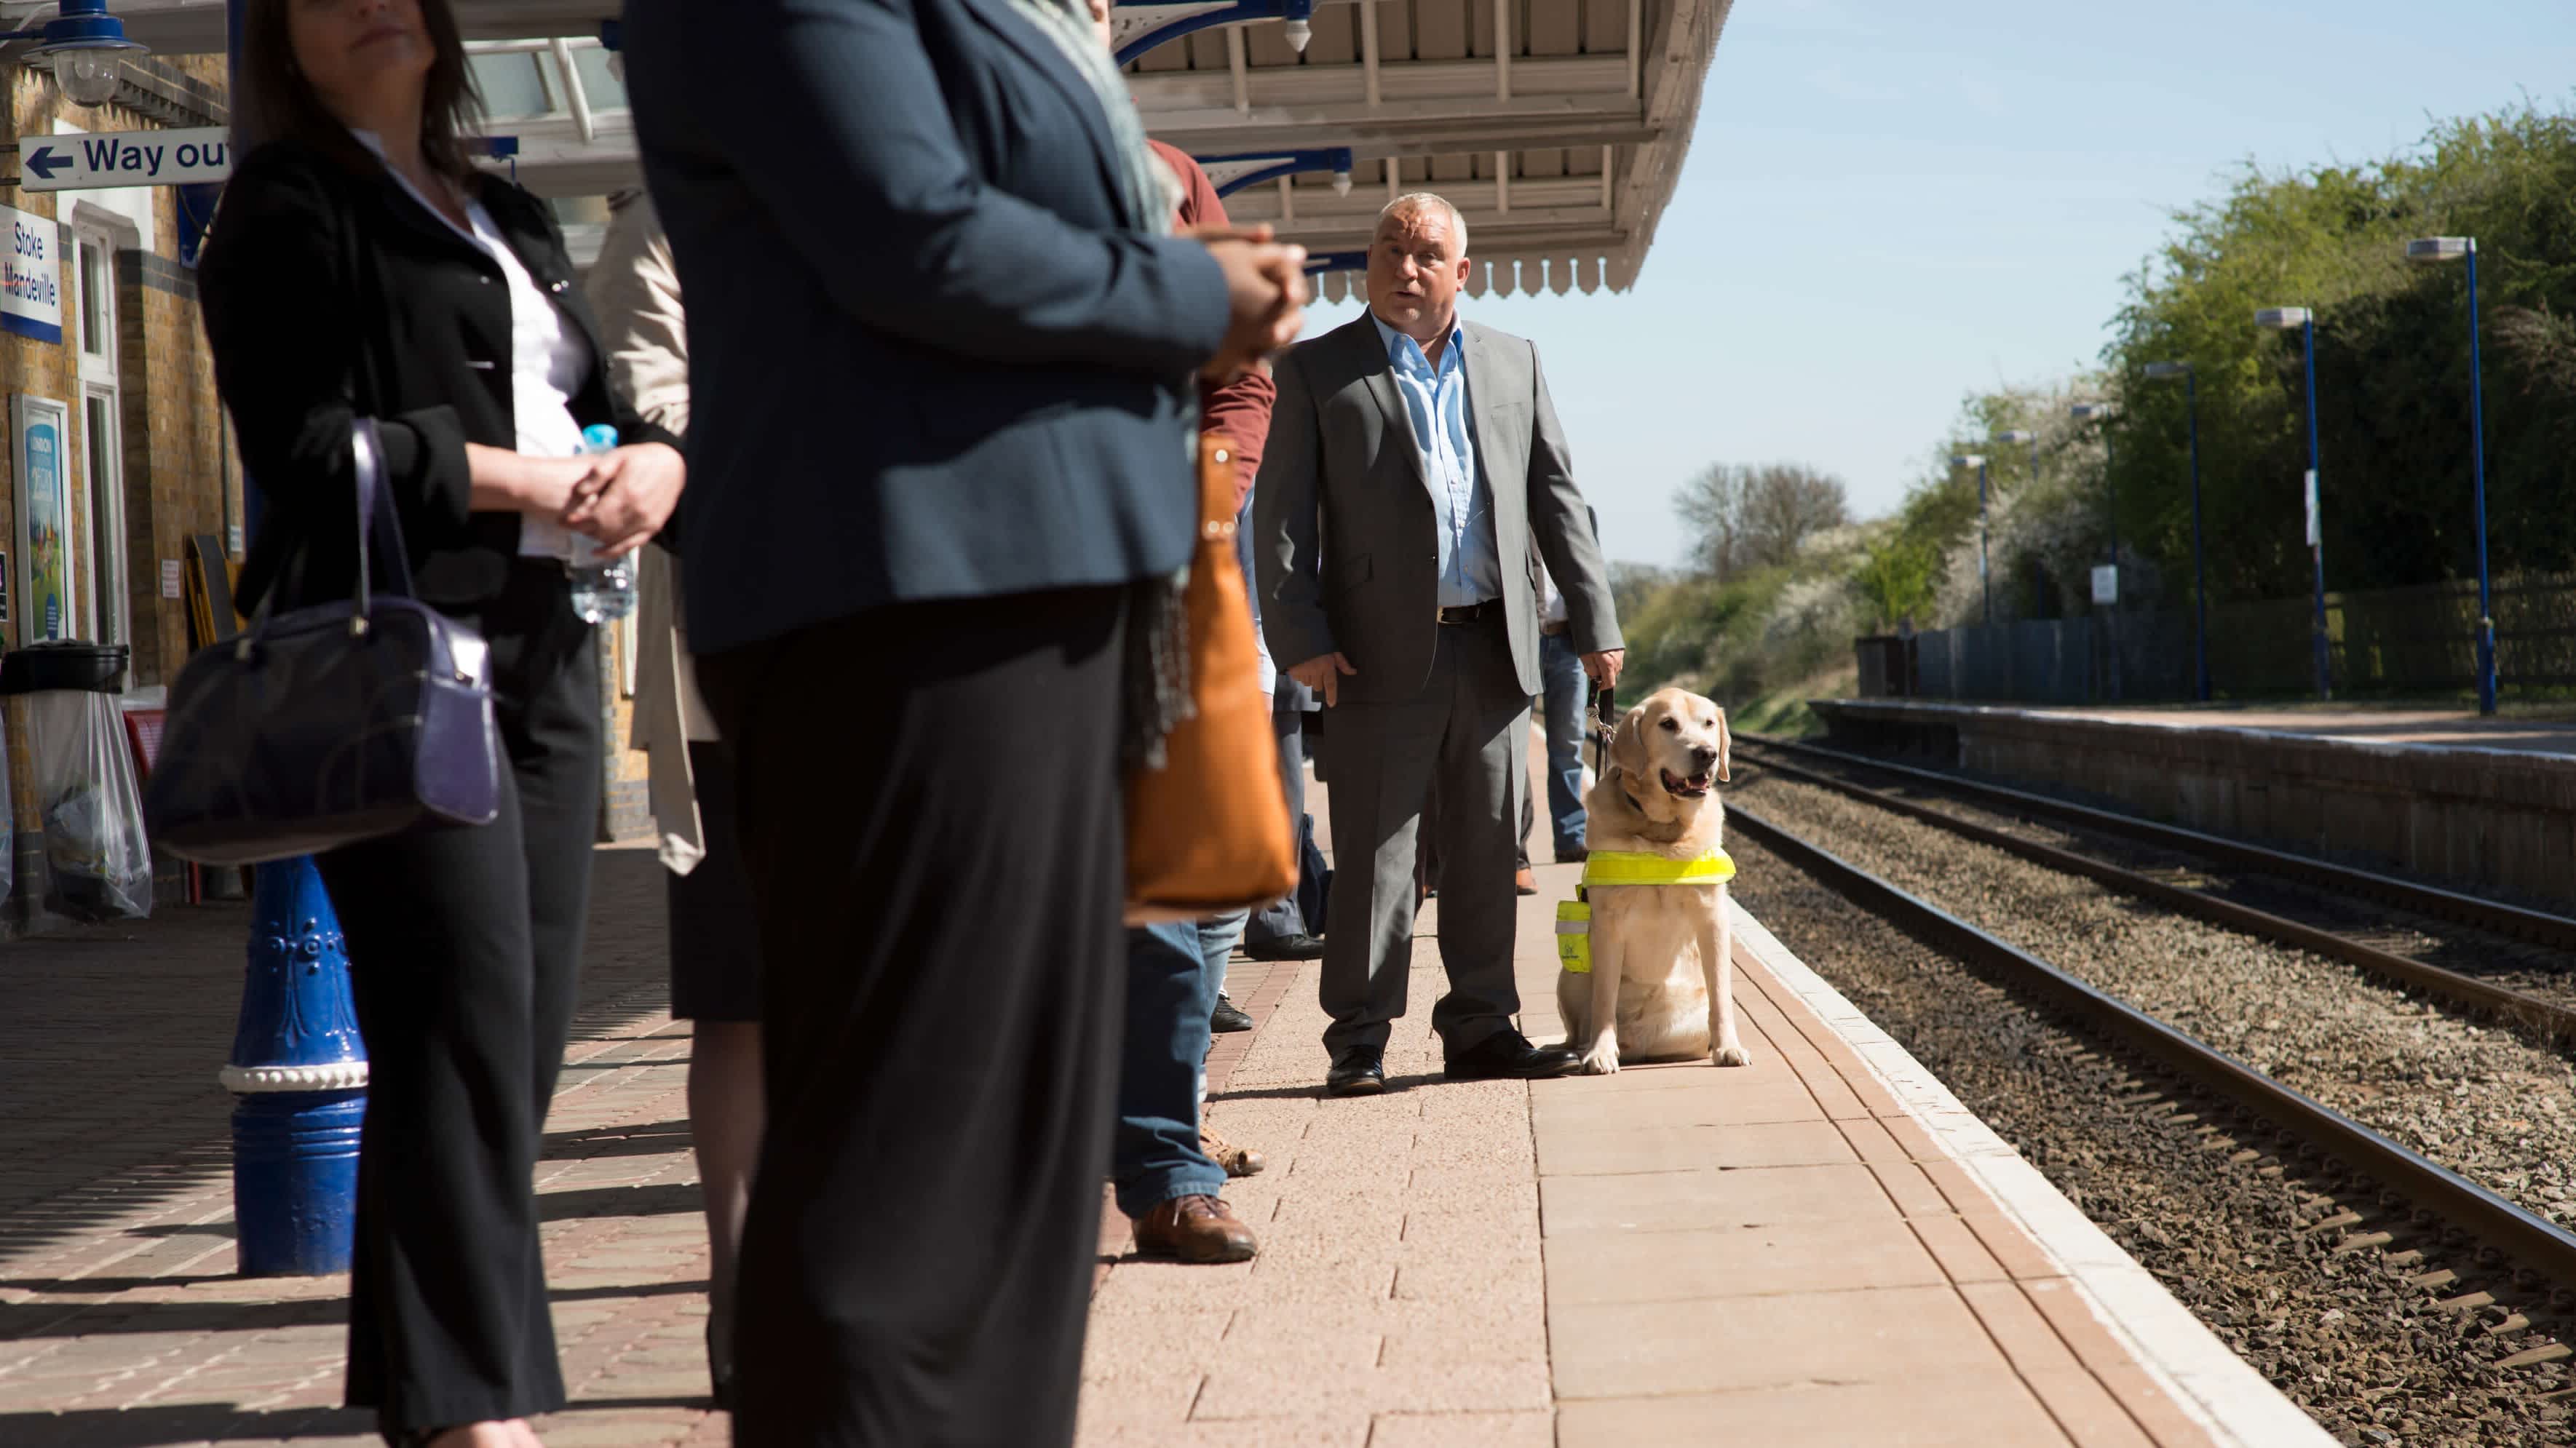 A yellow guide dog sat on a train station platform, next to a male owner wearing a suit. They are surrounded by other train passengers.